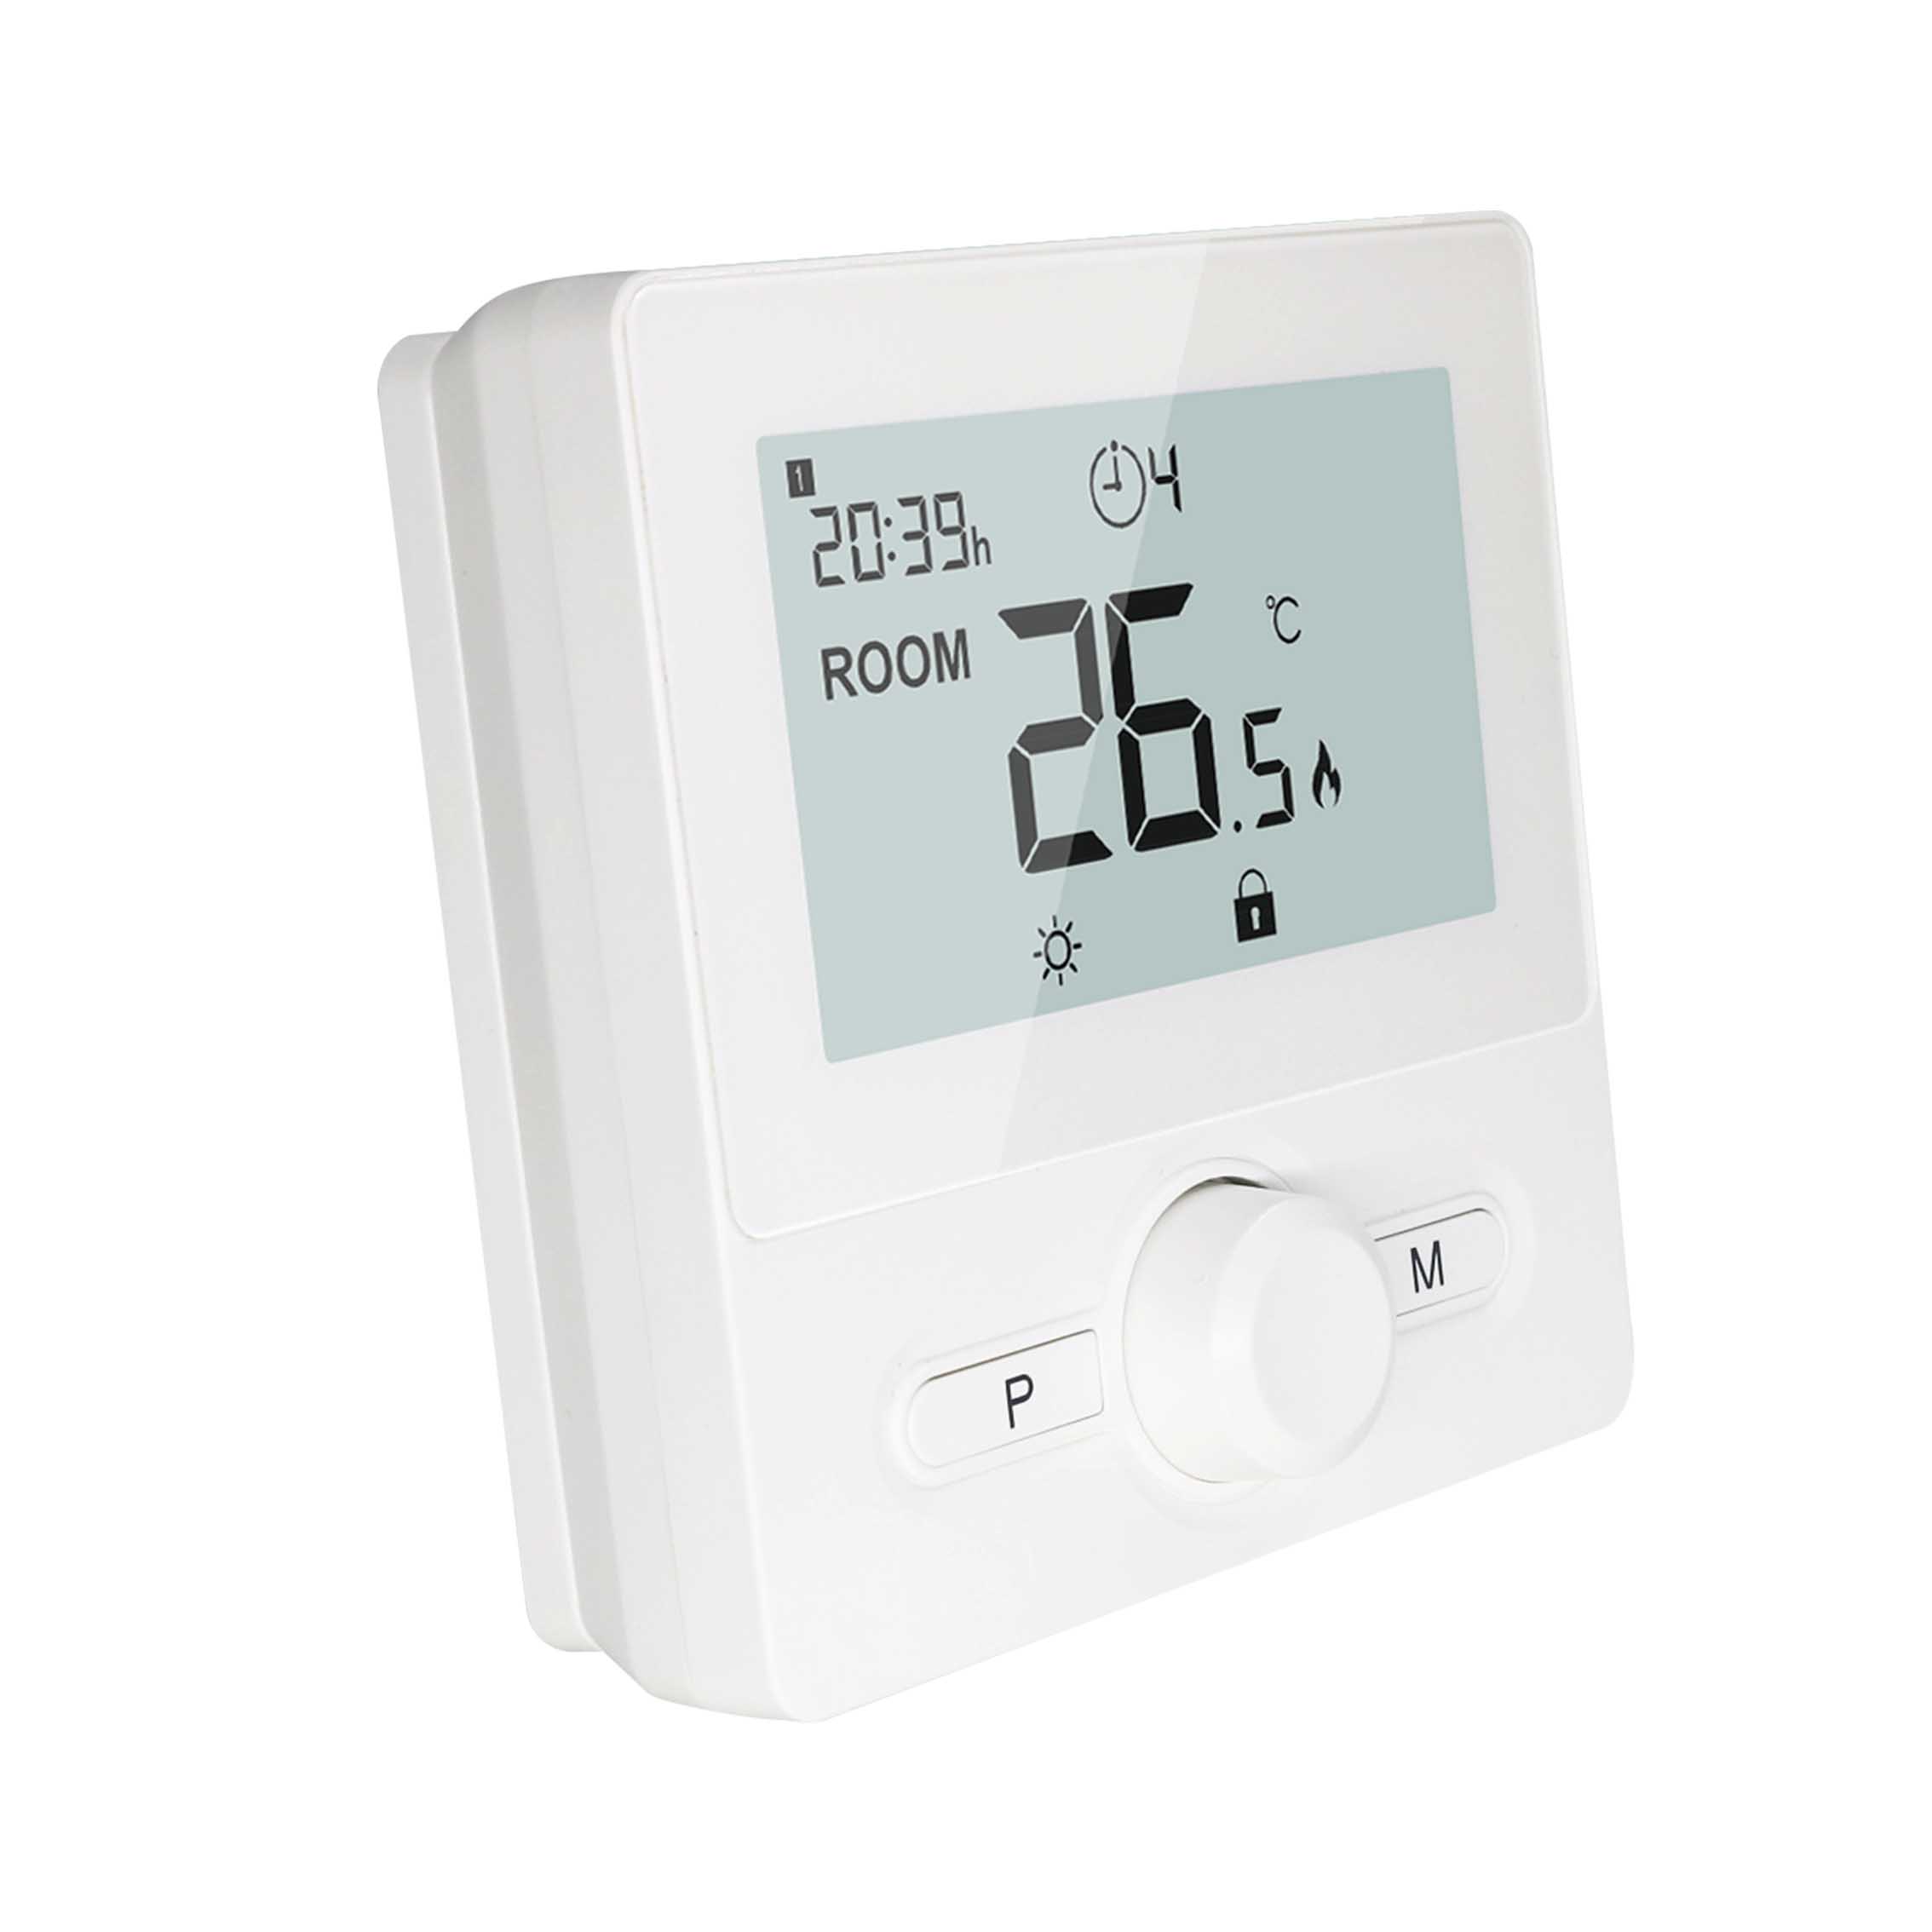 Enhance Efficiency and Convenience with our Smart RF Wireless Modbus Thermostat for Water Heat Pump Control